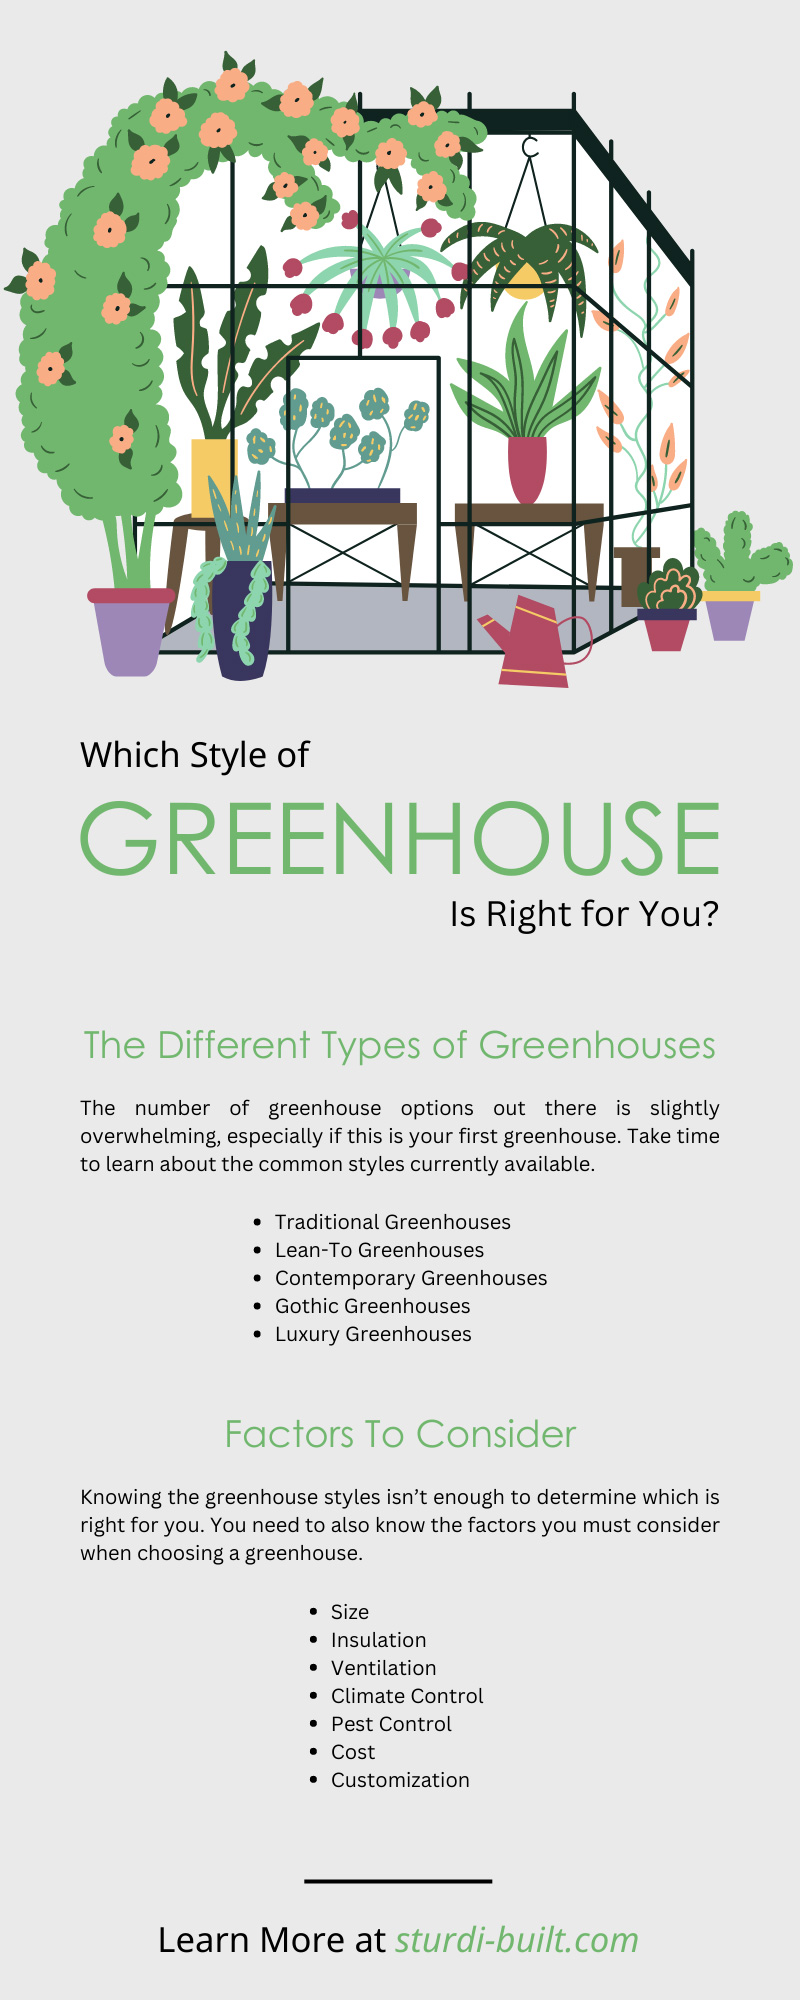 Which Style of Greenhouse Is Right for You?